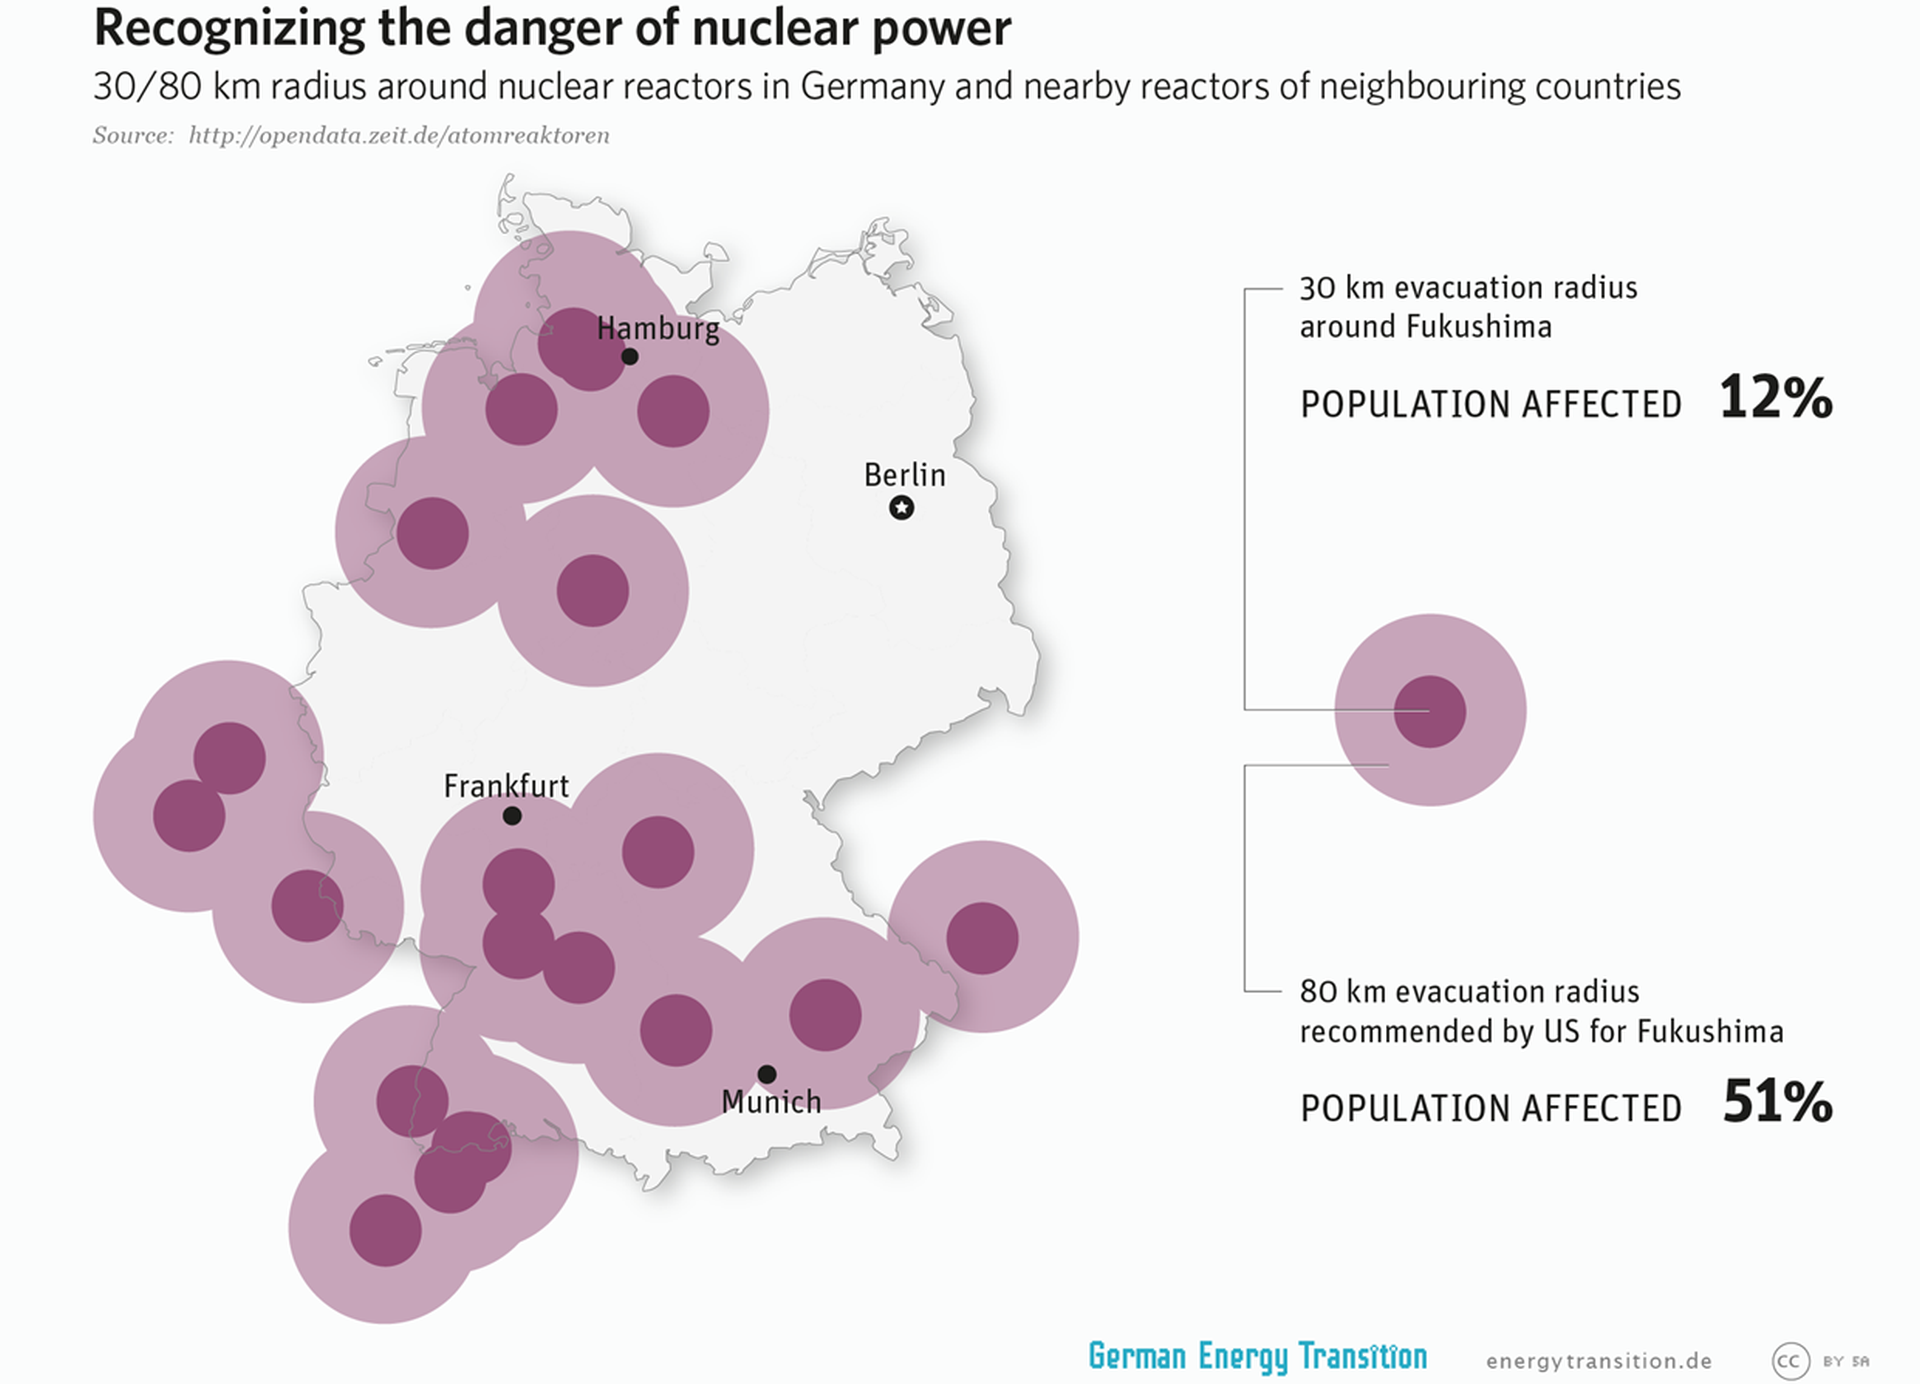 A graphic showing the radius around nuclear reactors in Germany nearby reactors in neighbouring countries. 